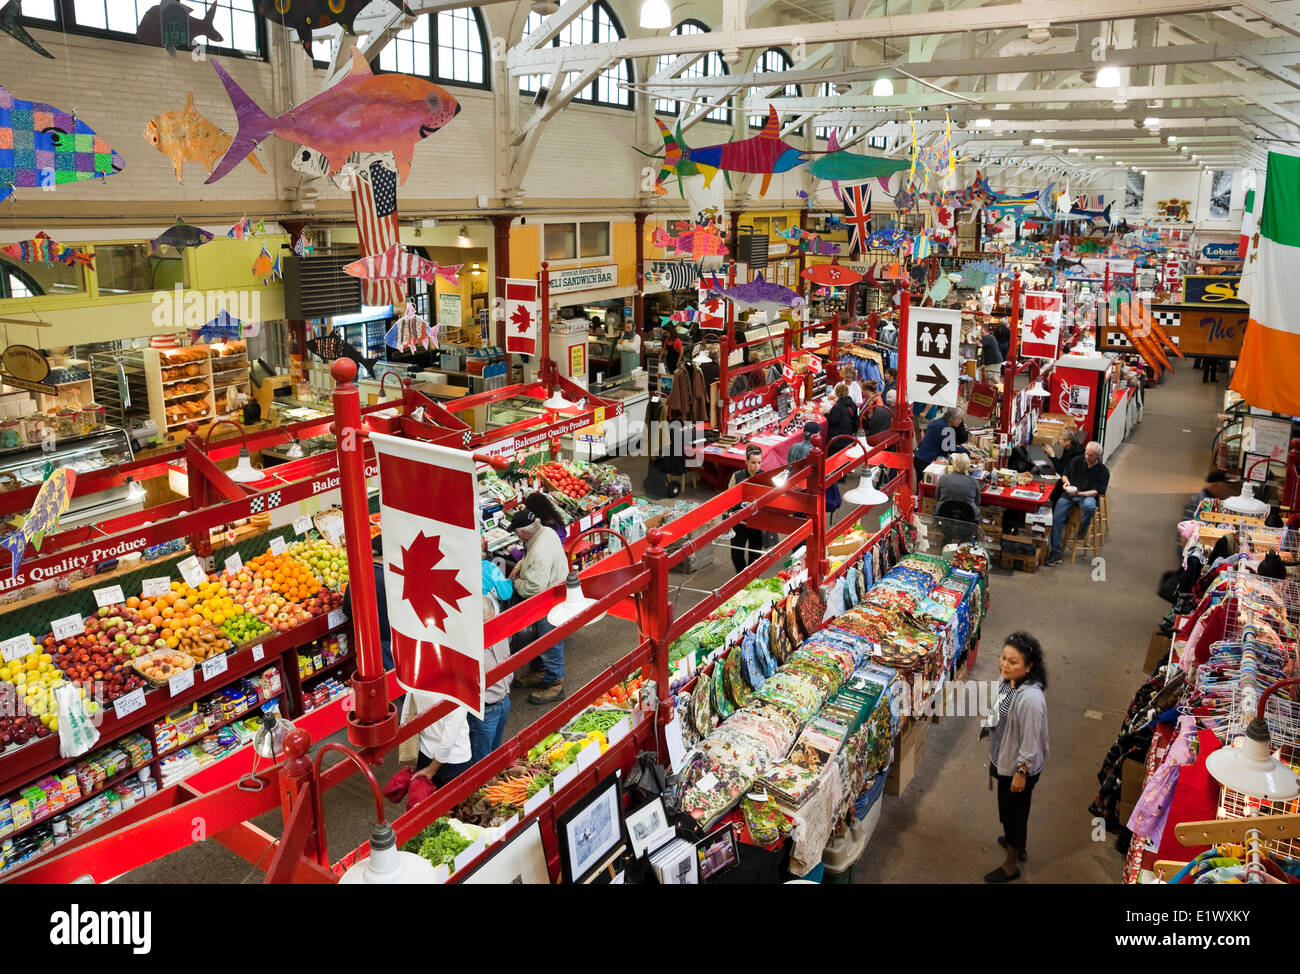 Opened in 1876 and located in Saint John, New Brunswick, the Saint John City Market has four rows of stalls covering an entire b Stock Photo